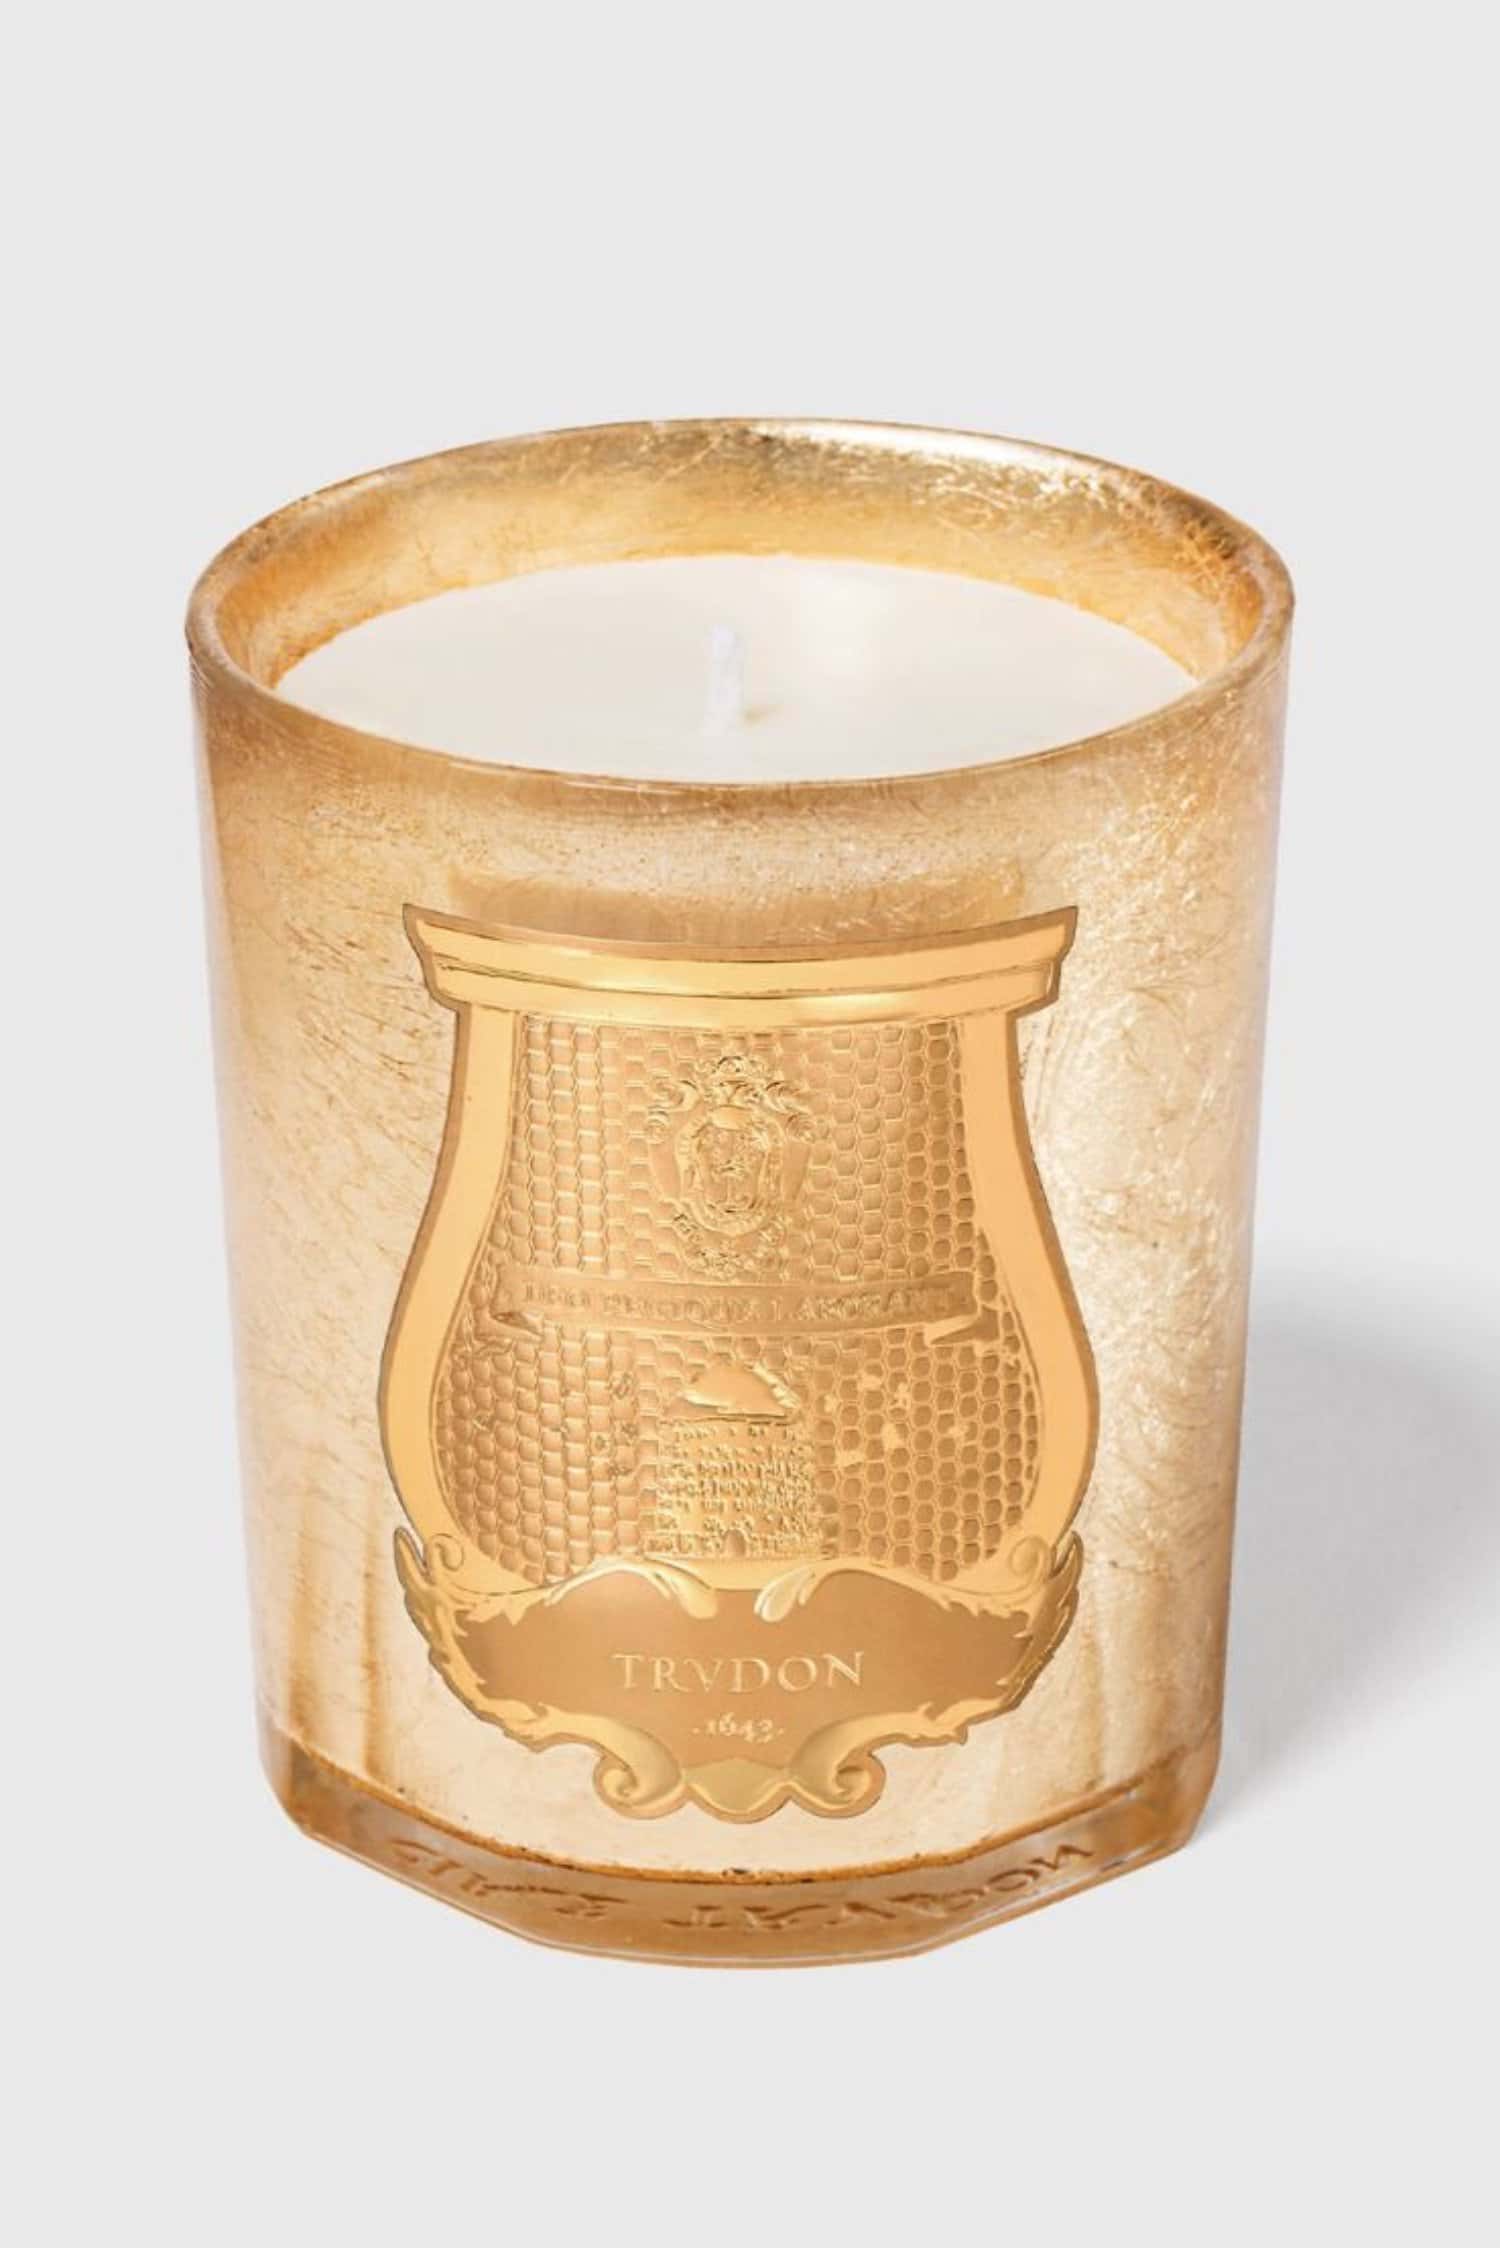 Mother's Day, Trudon, candle